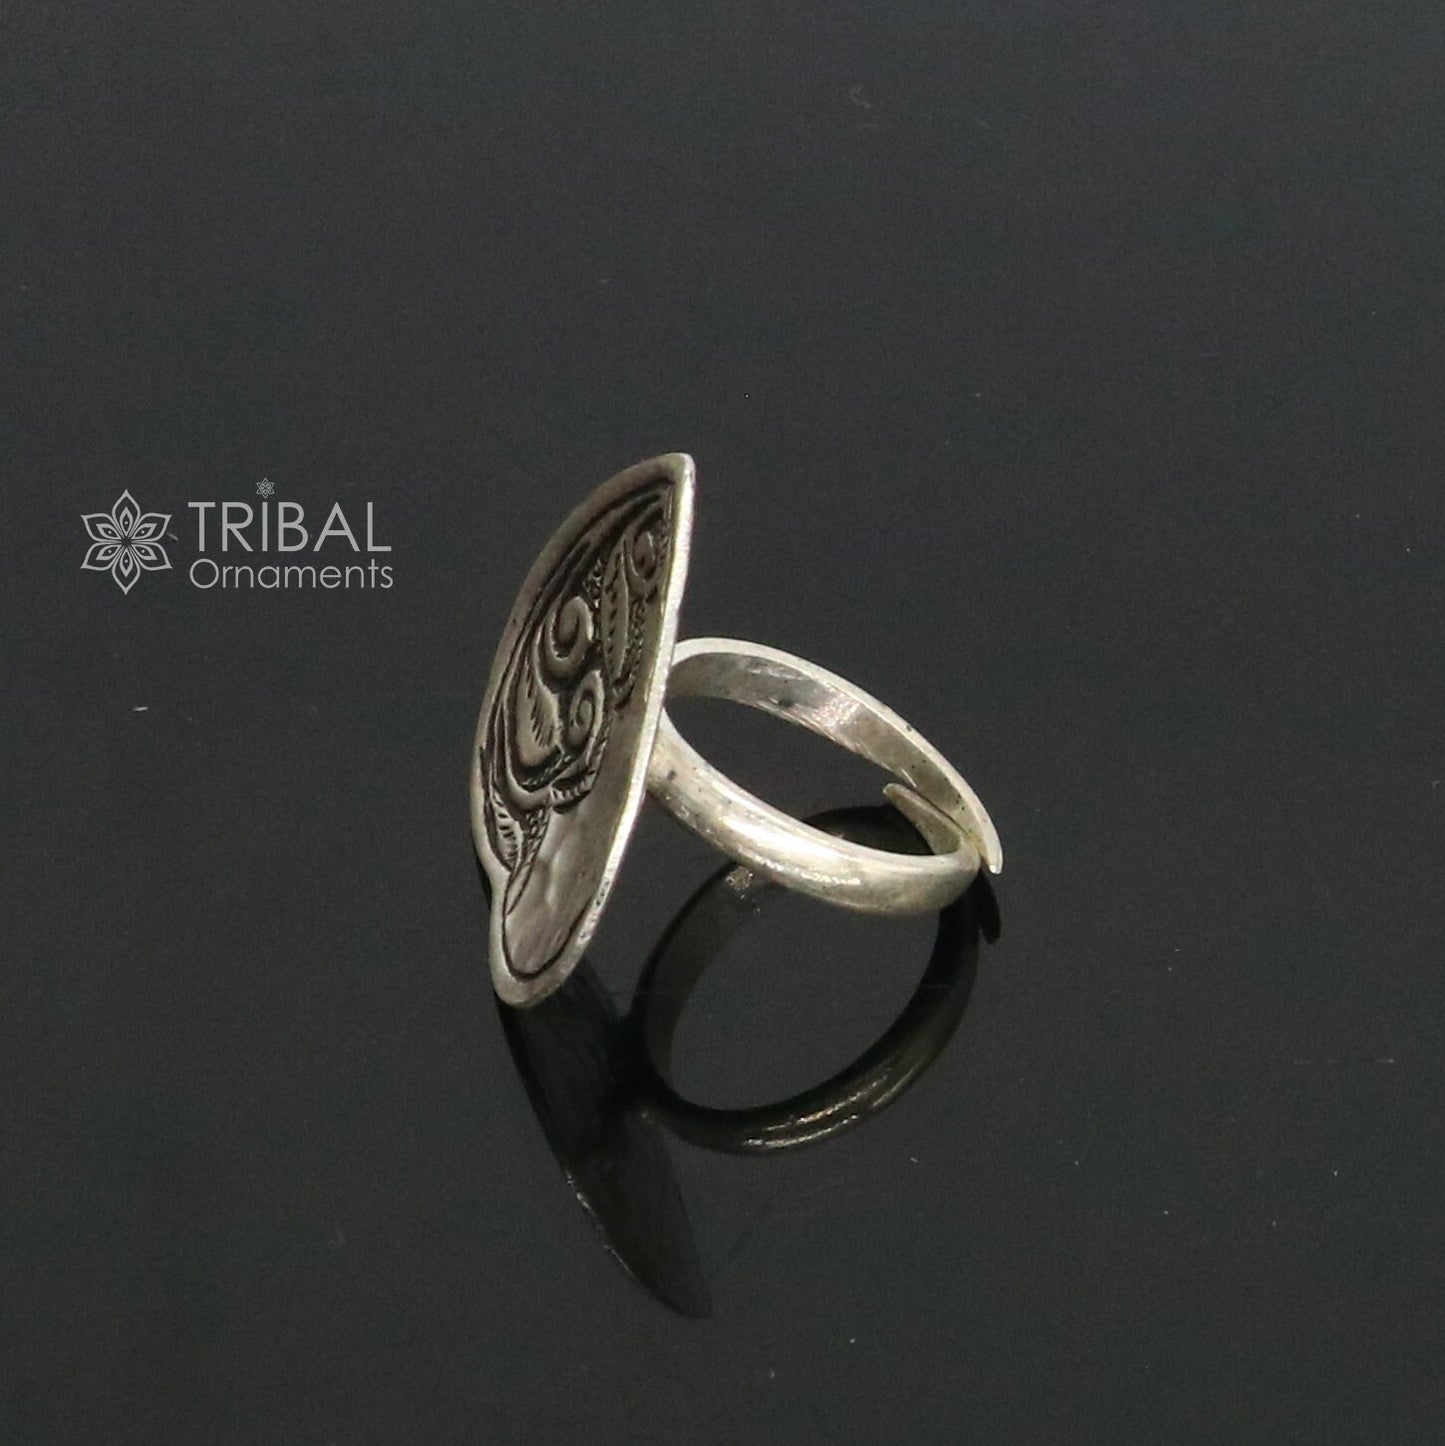 Heart shape Amazing Indian Classical cultural design 925 sterling silver adjustable ring, best tribal ethnic jewelry Navratri jewelry sr394 - TRIBAL ORNAMENTS